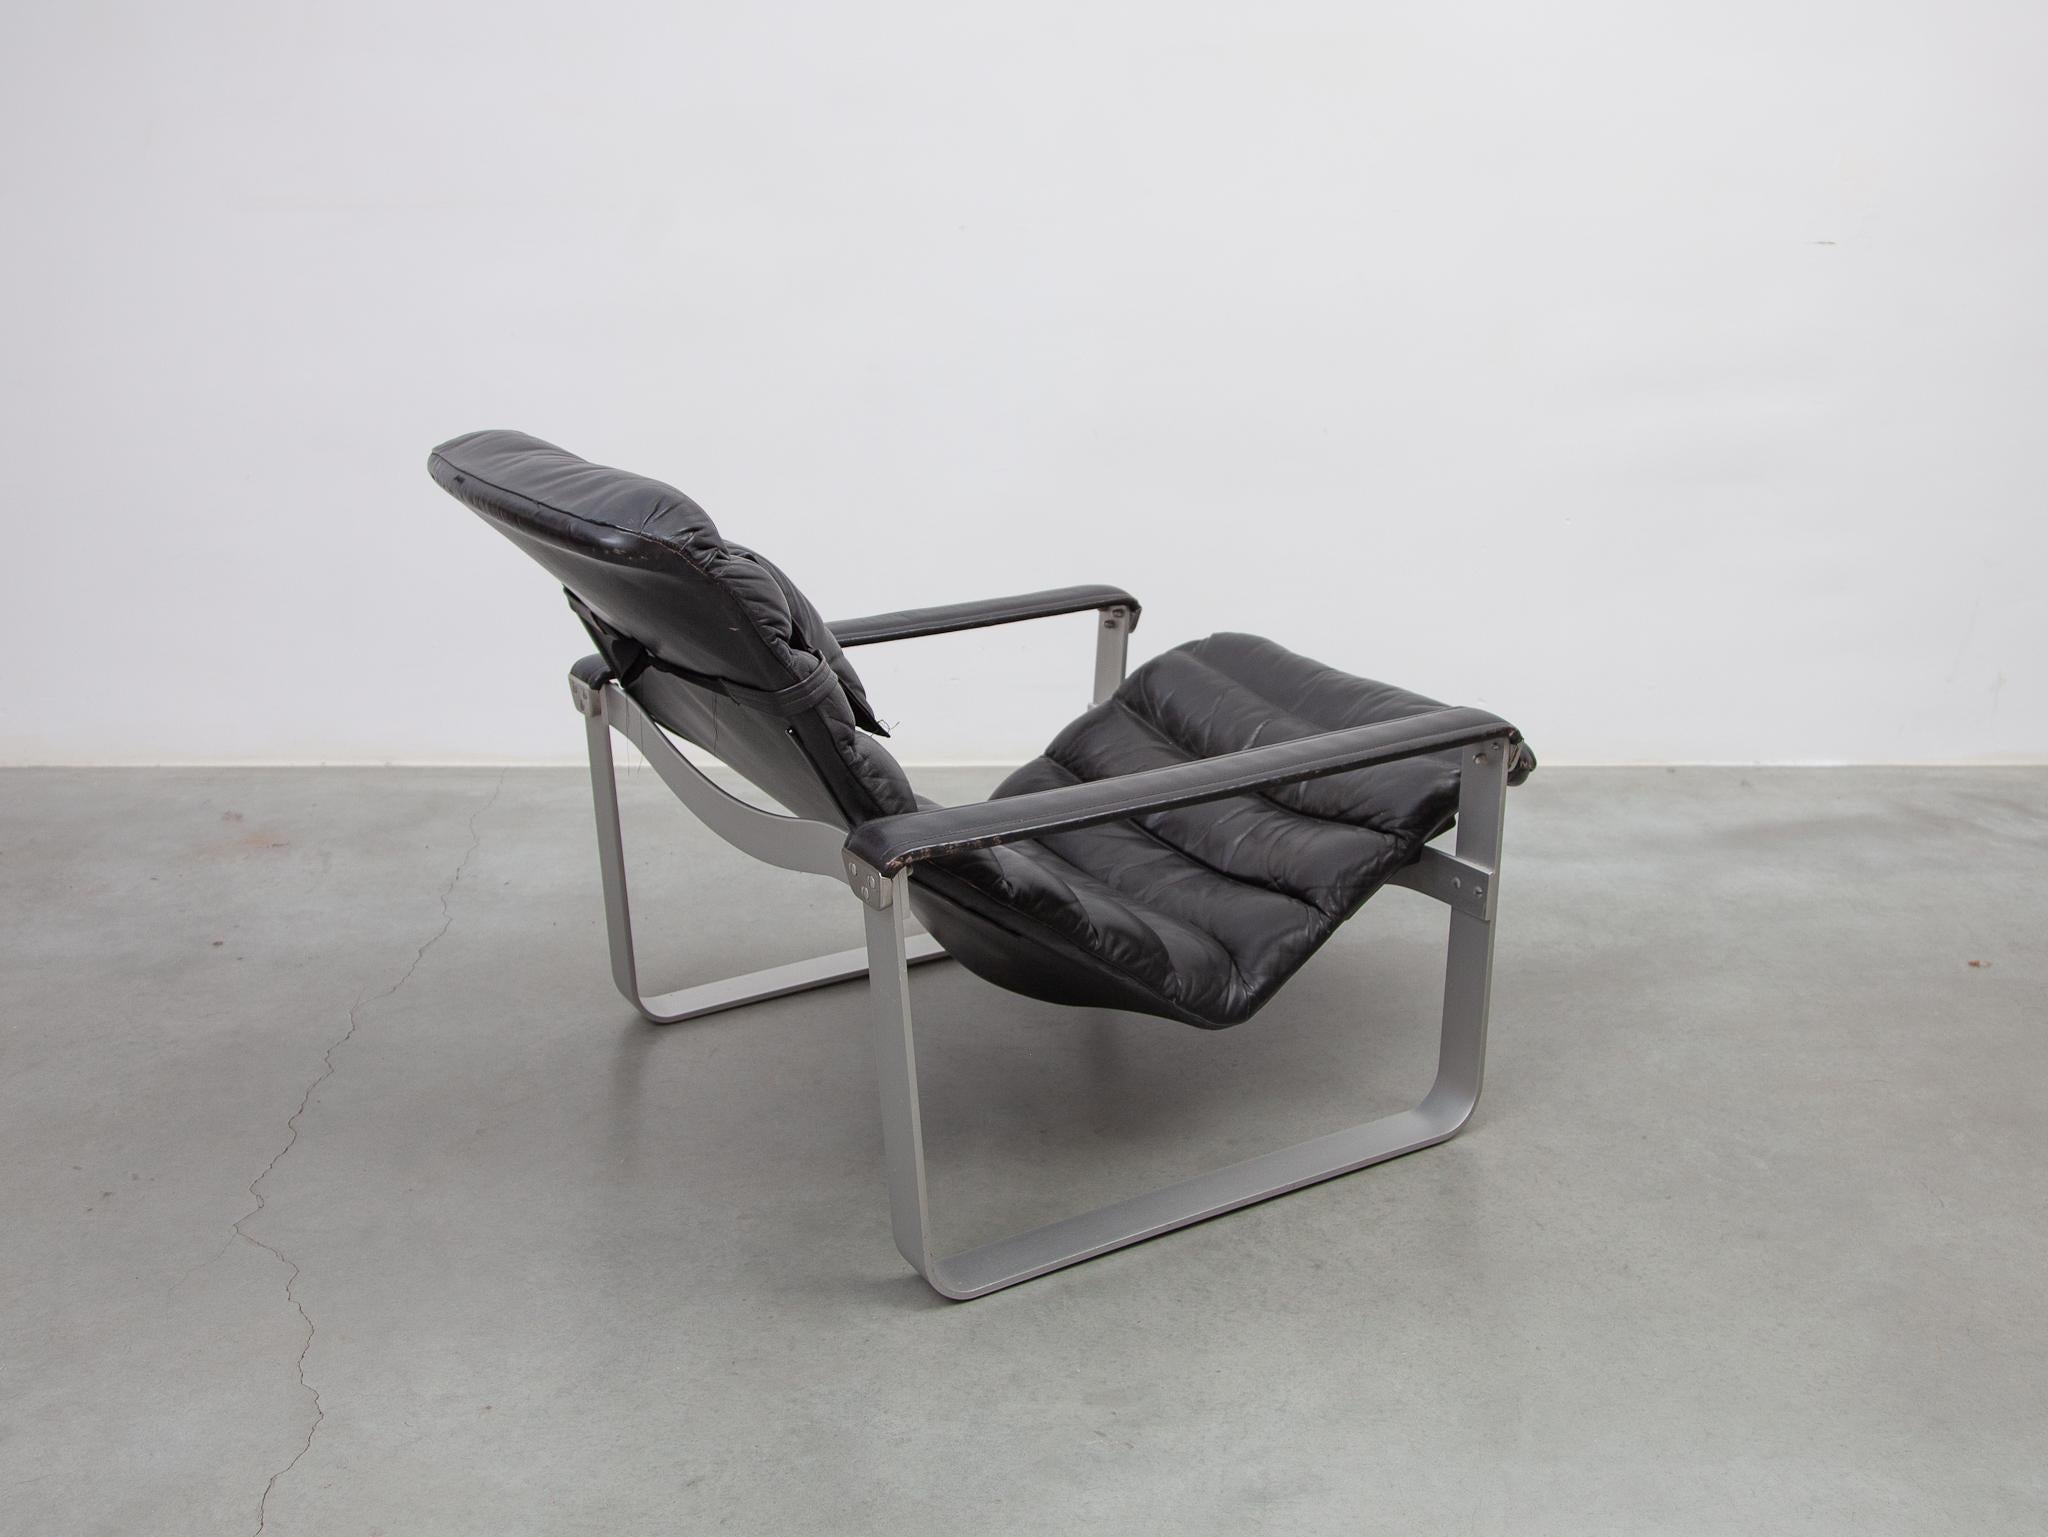 Hand-Crafted Pulkka Lounge Chair designed by Ilmari Lappalainen by ASKO, Finland, 1968 For Sale